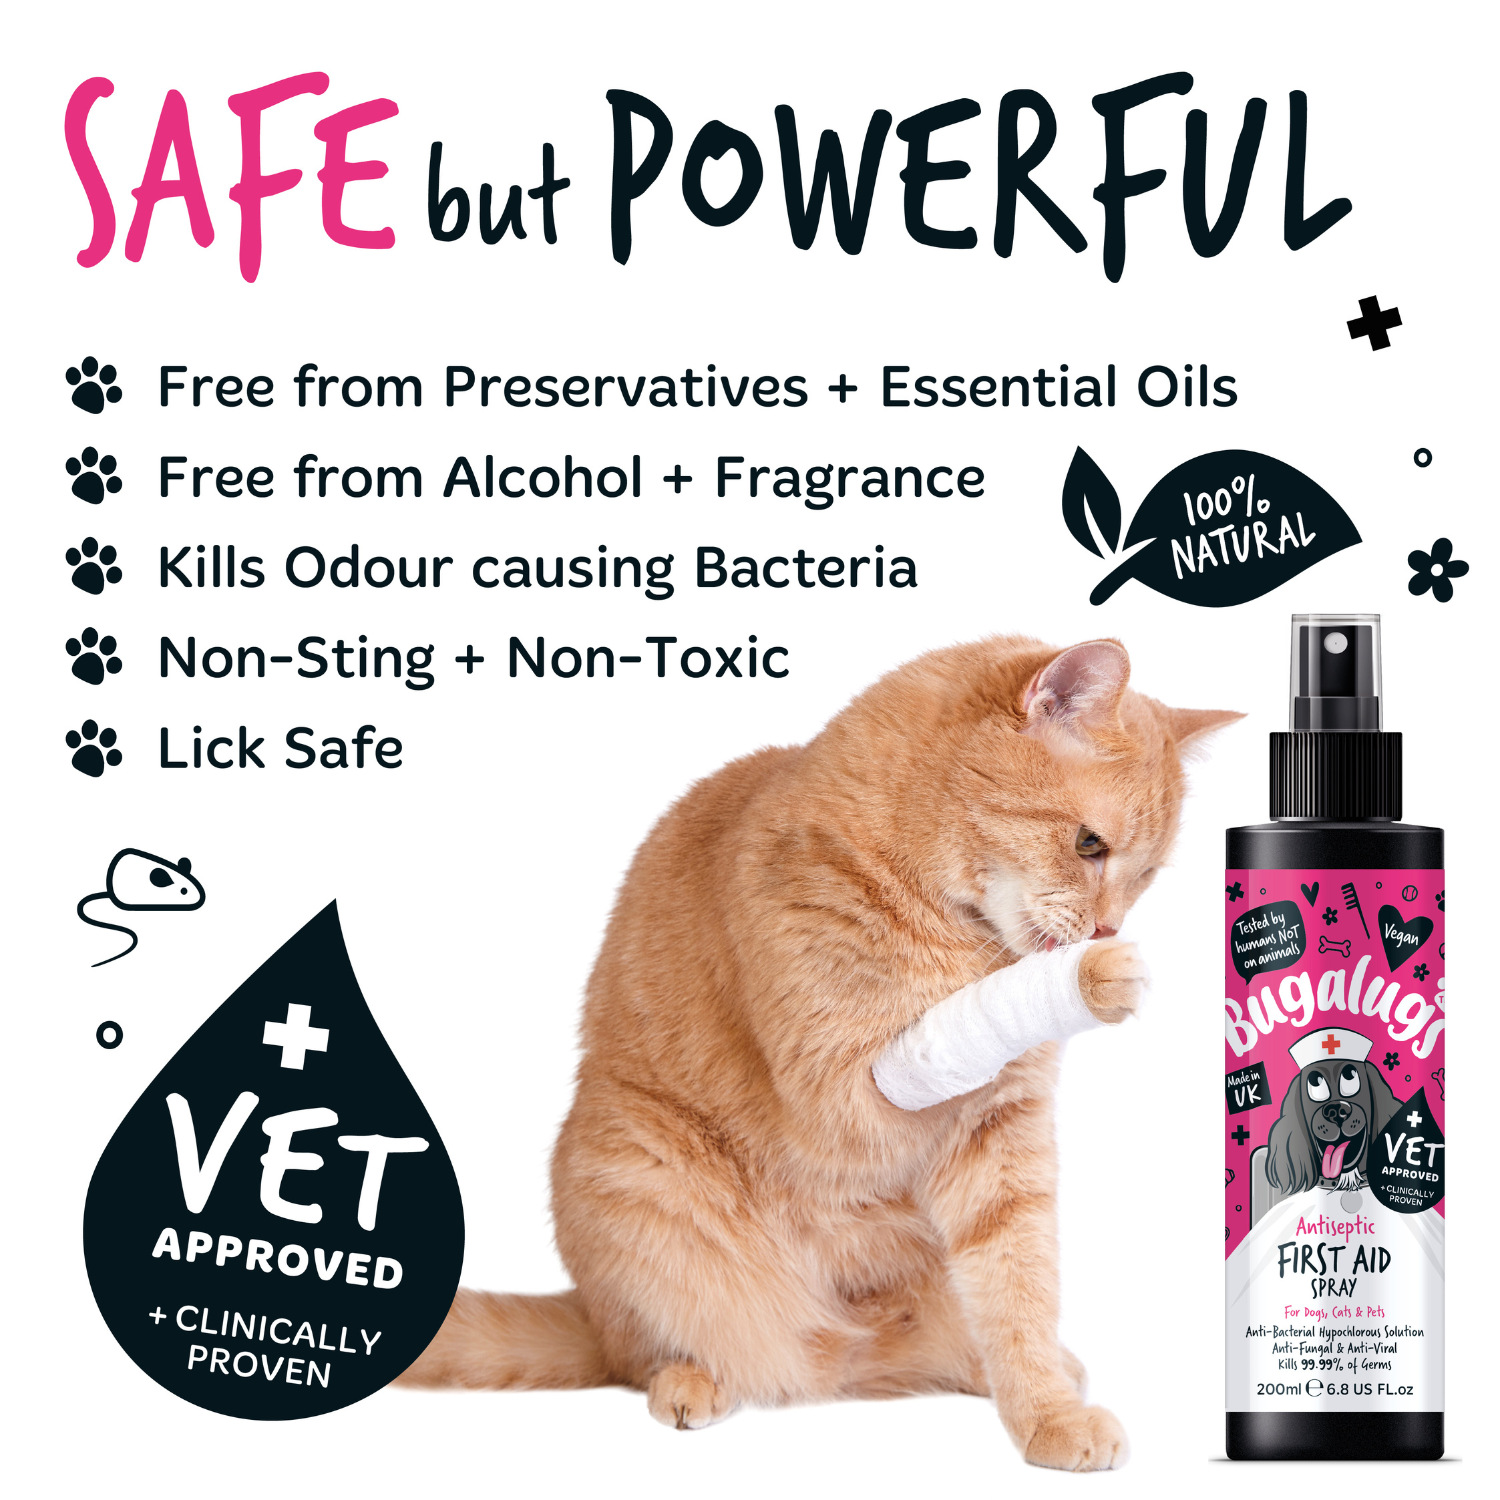 Bugalugs Antiseptic First Aid Spray for Dogs, Cats and Pets - Safe but powerful